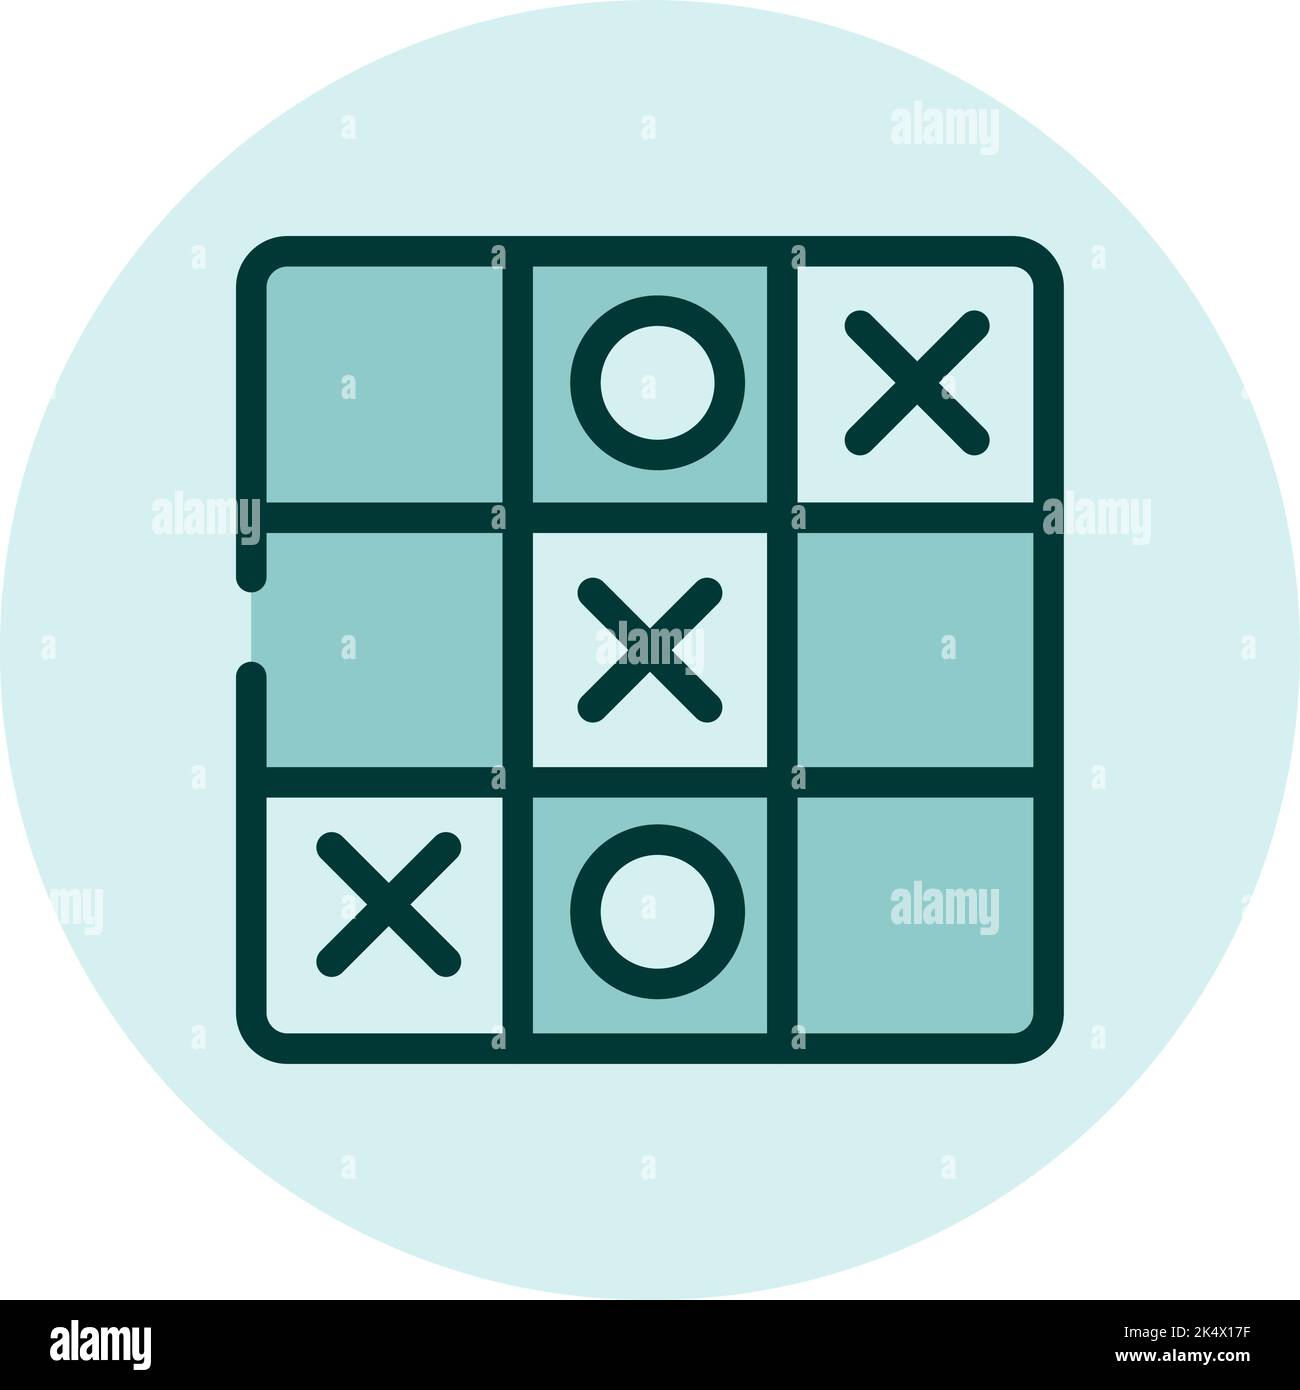 Tic tac toe game Cut Out Stock Images & Pictures - Alamy